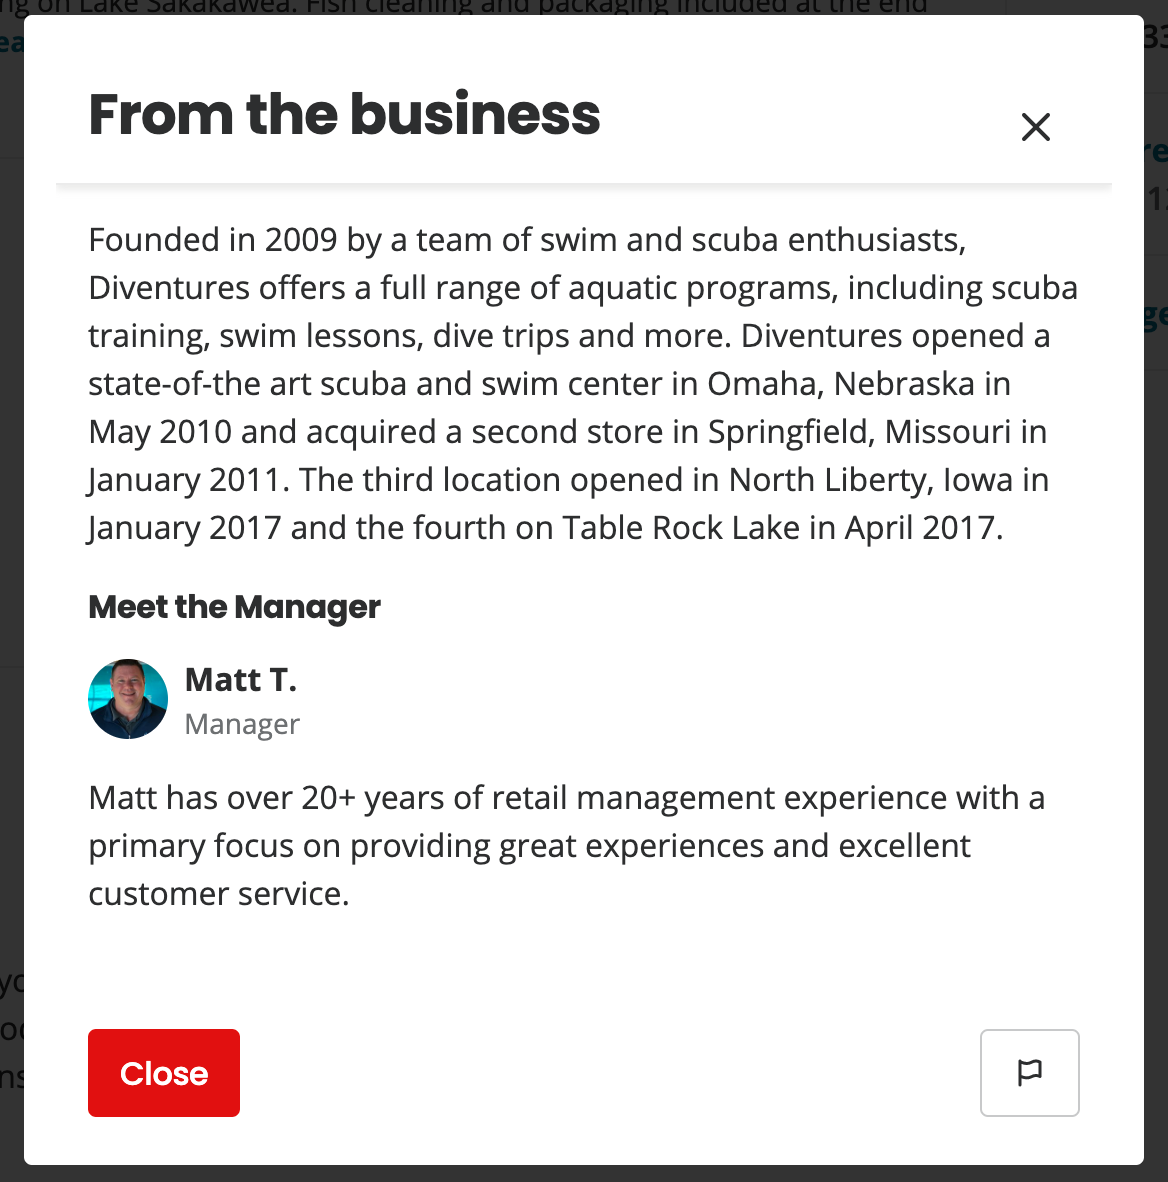 Screenshot of "From the Business" section on Yelp for Diventures and the manager, Matt T.